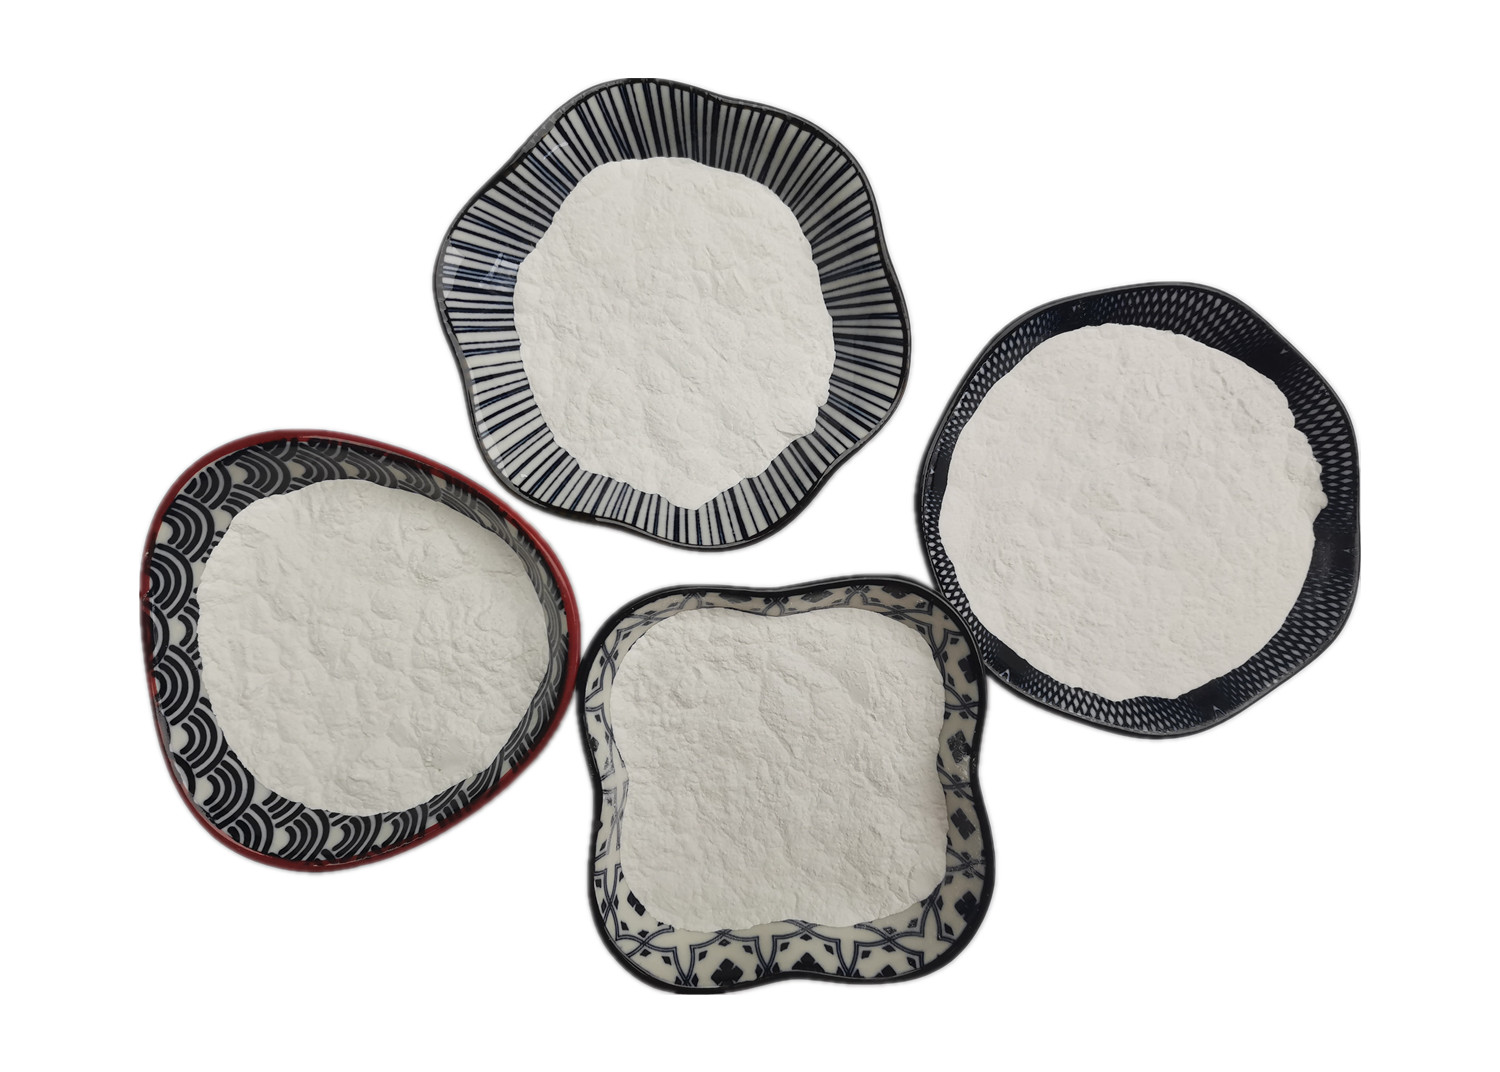 Diatomite filter aids make our lives healthy